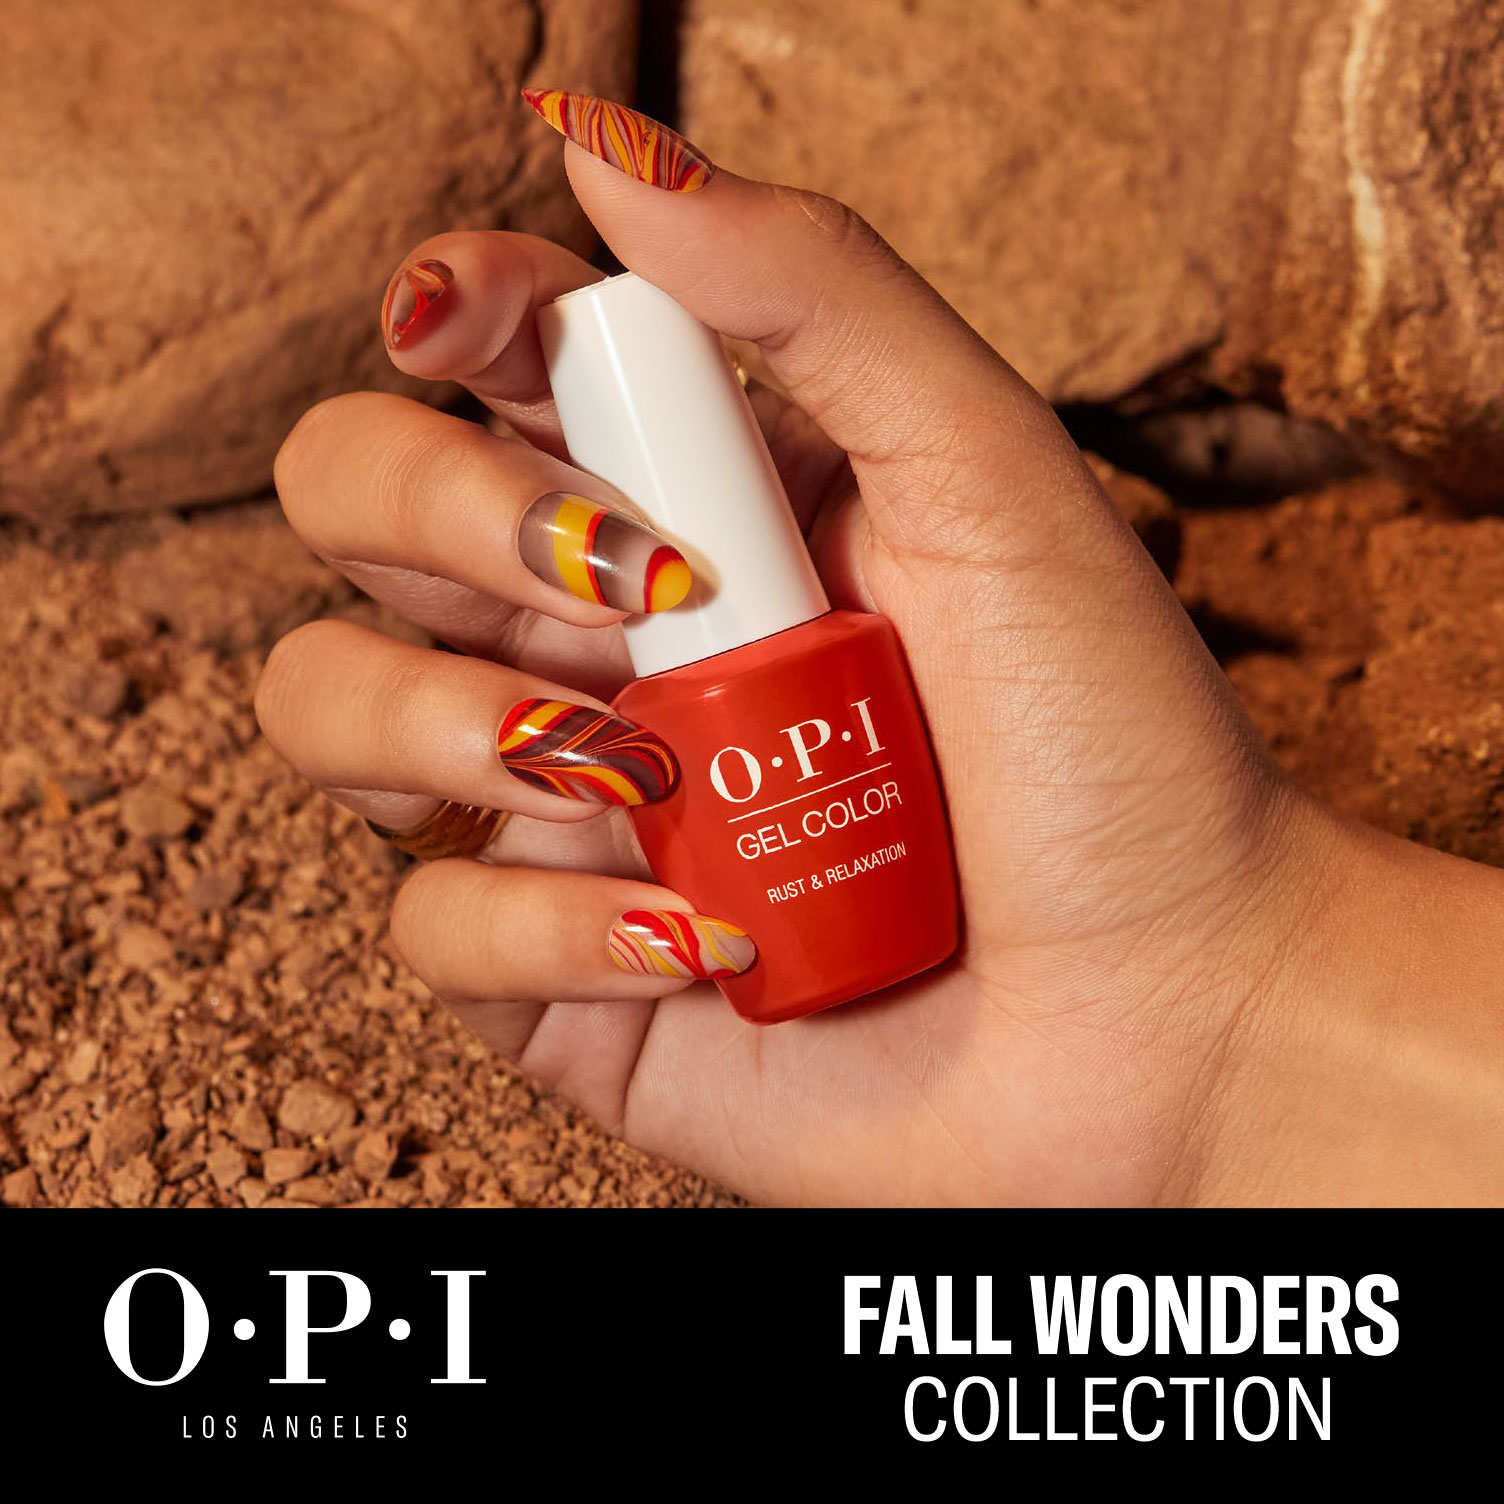 OPI Fall Wonders Collection